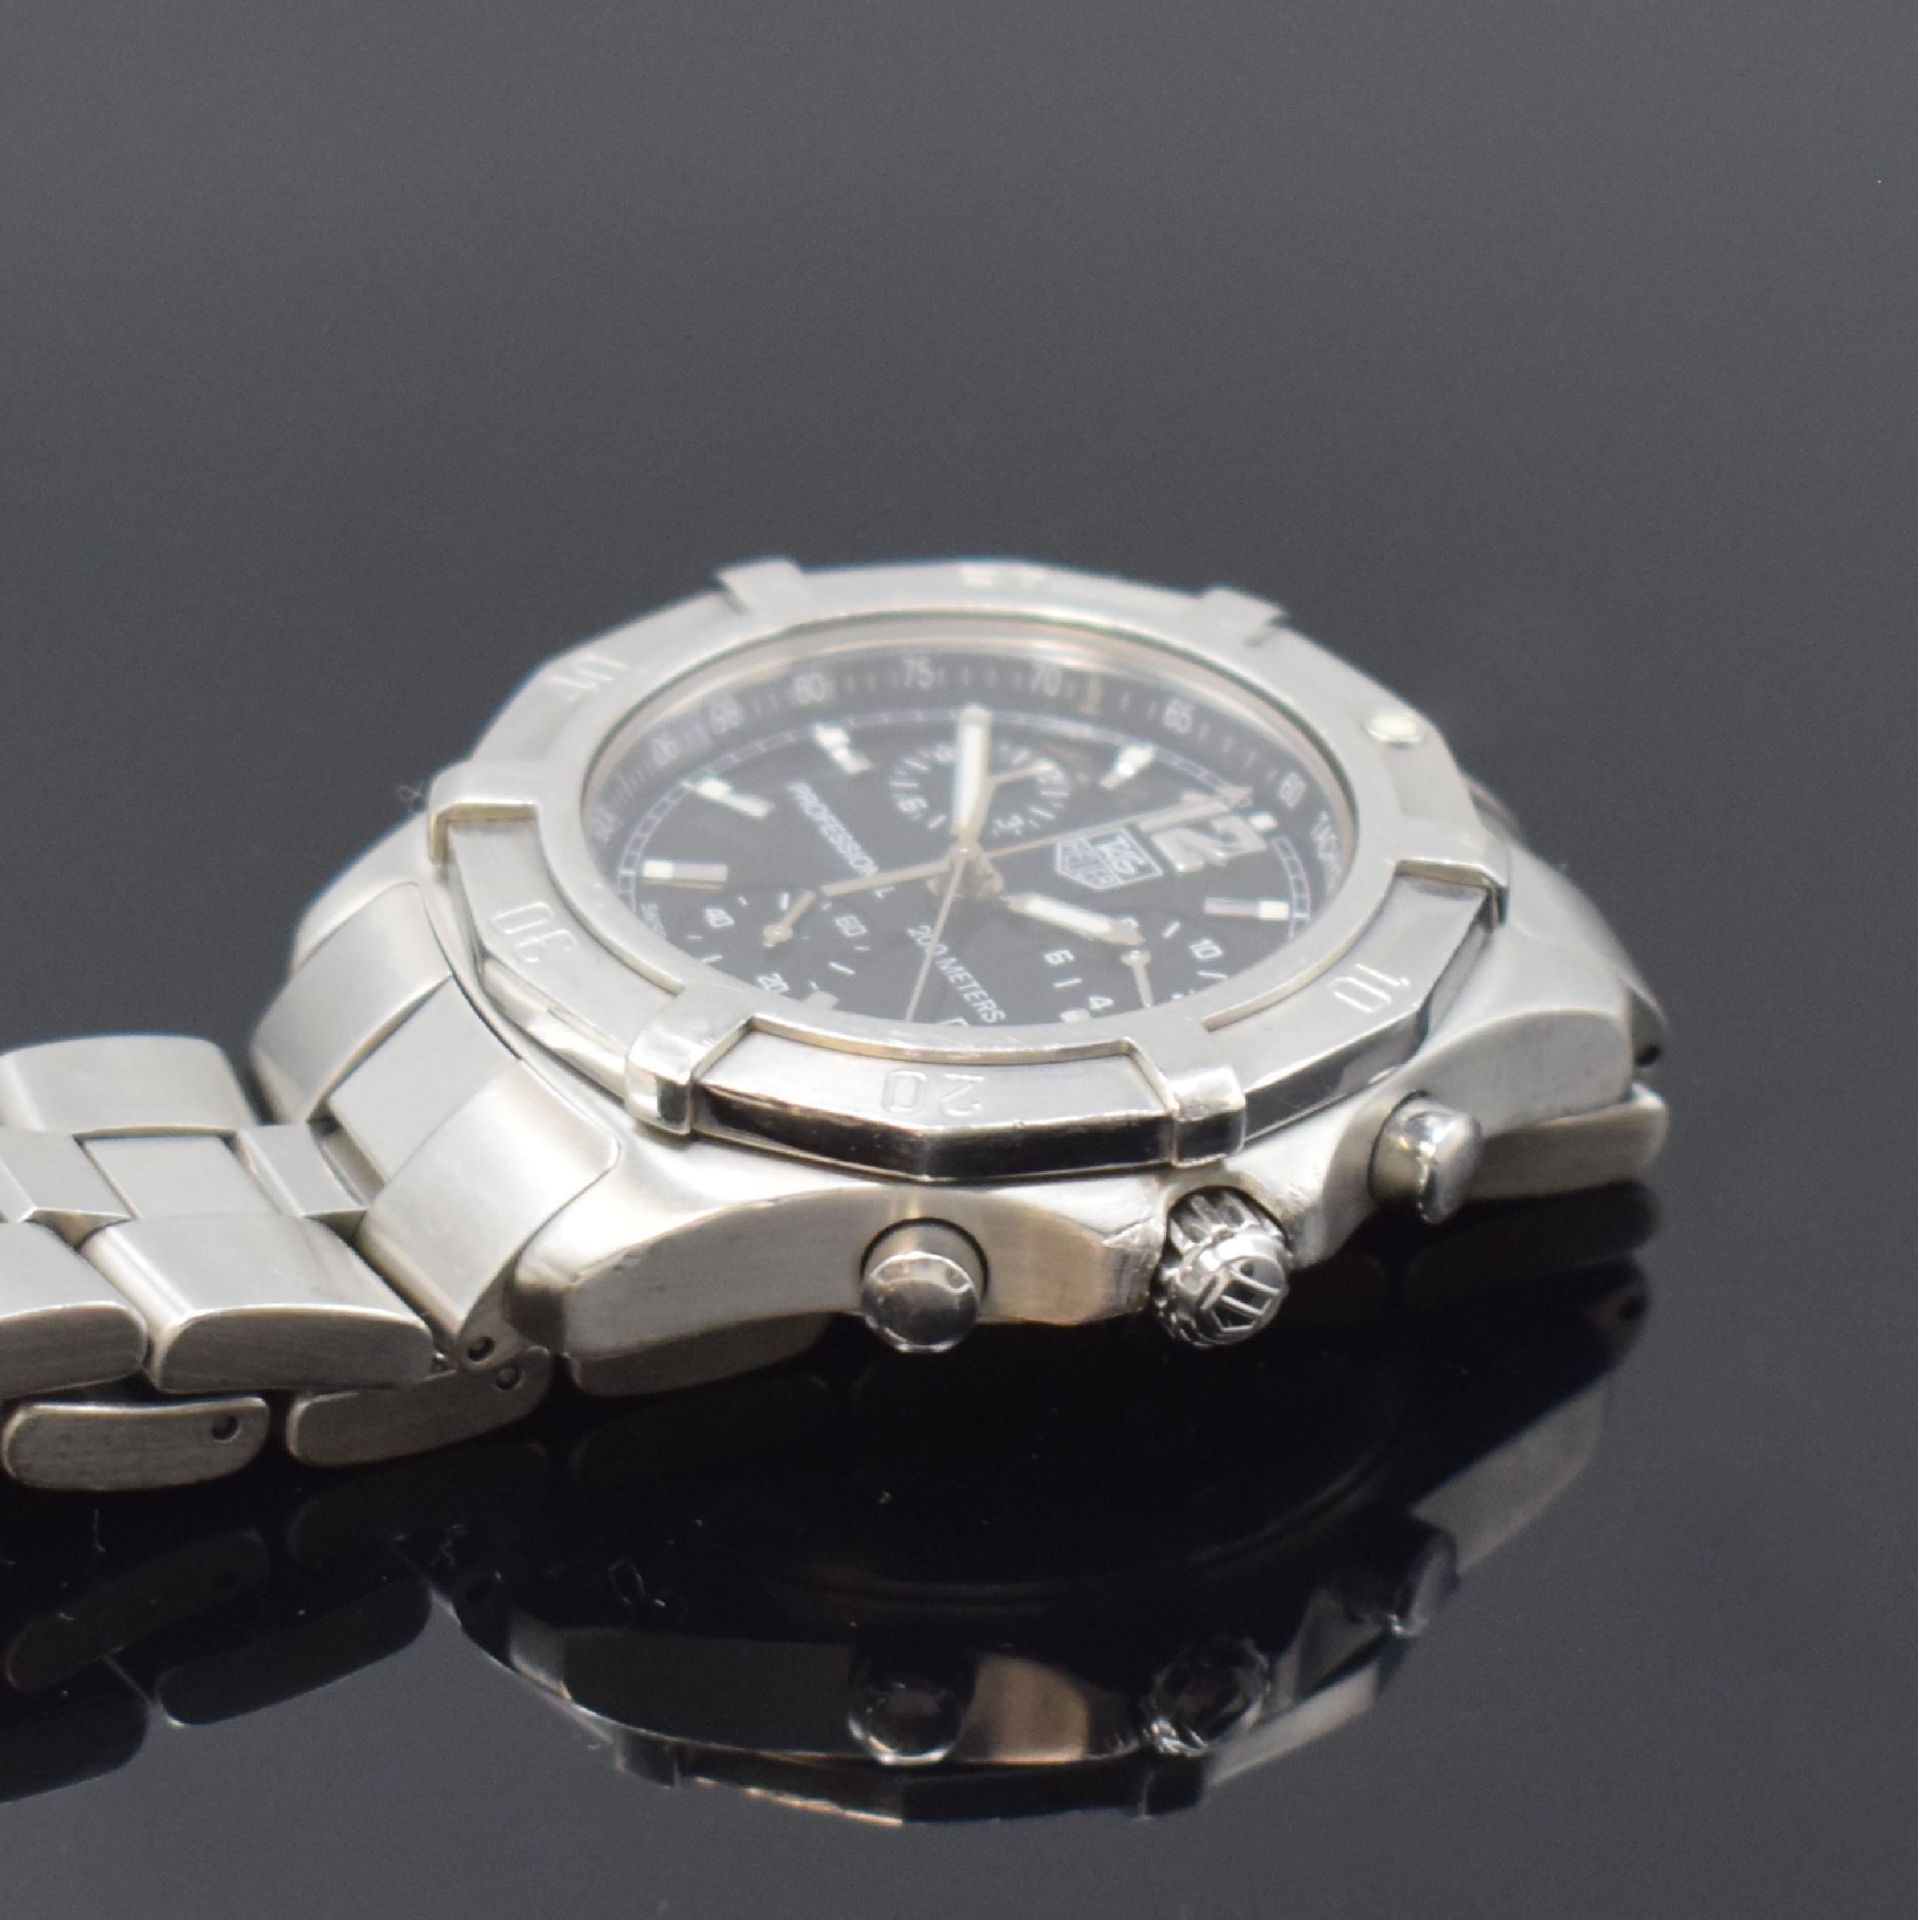 TAG HEUER Professional 2000 Herrenchronograph in Stahl - Image 4 of 6